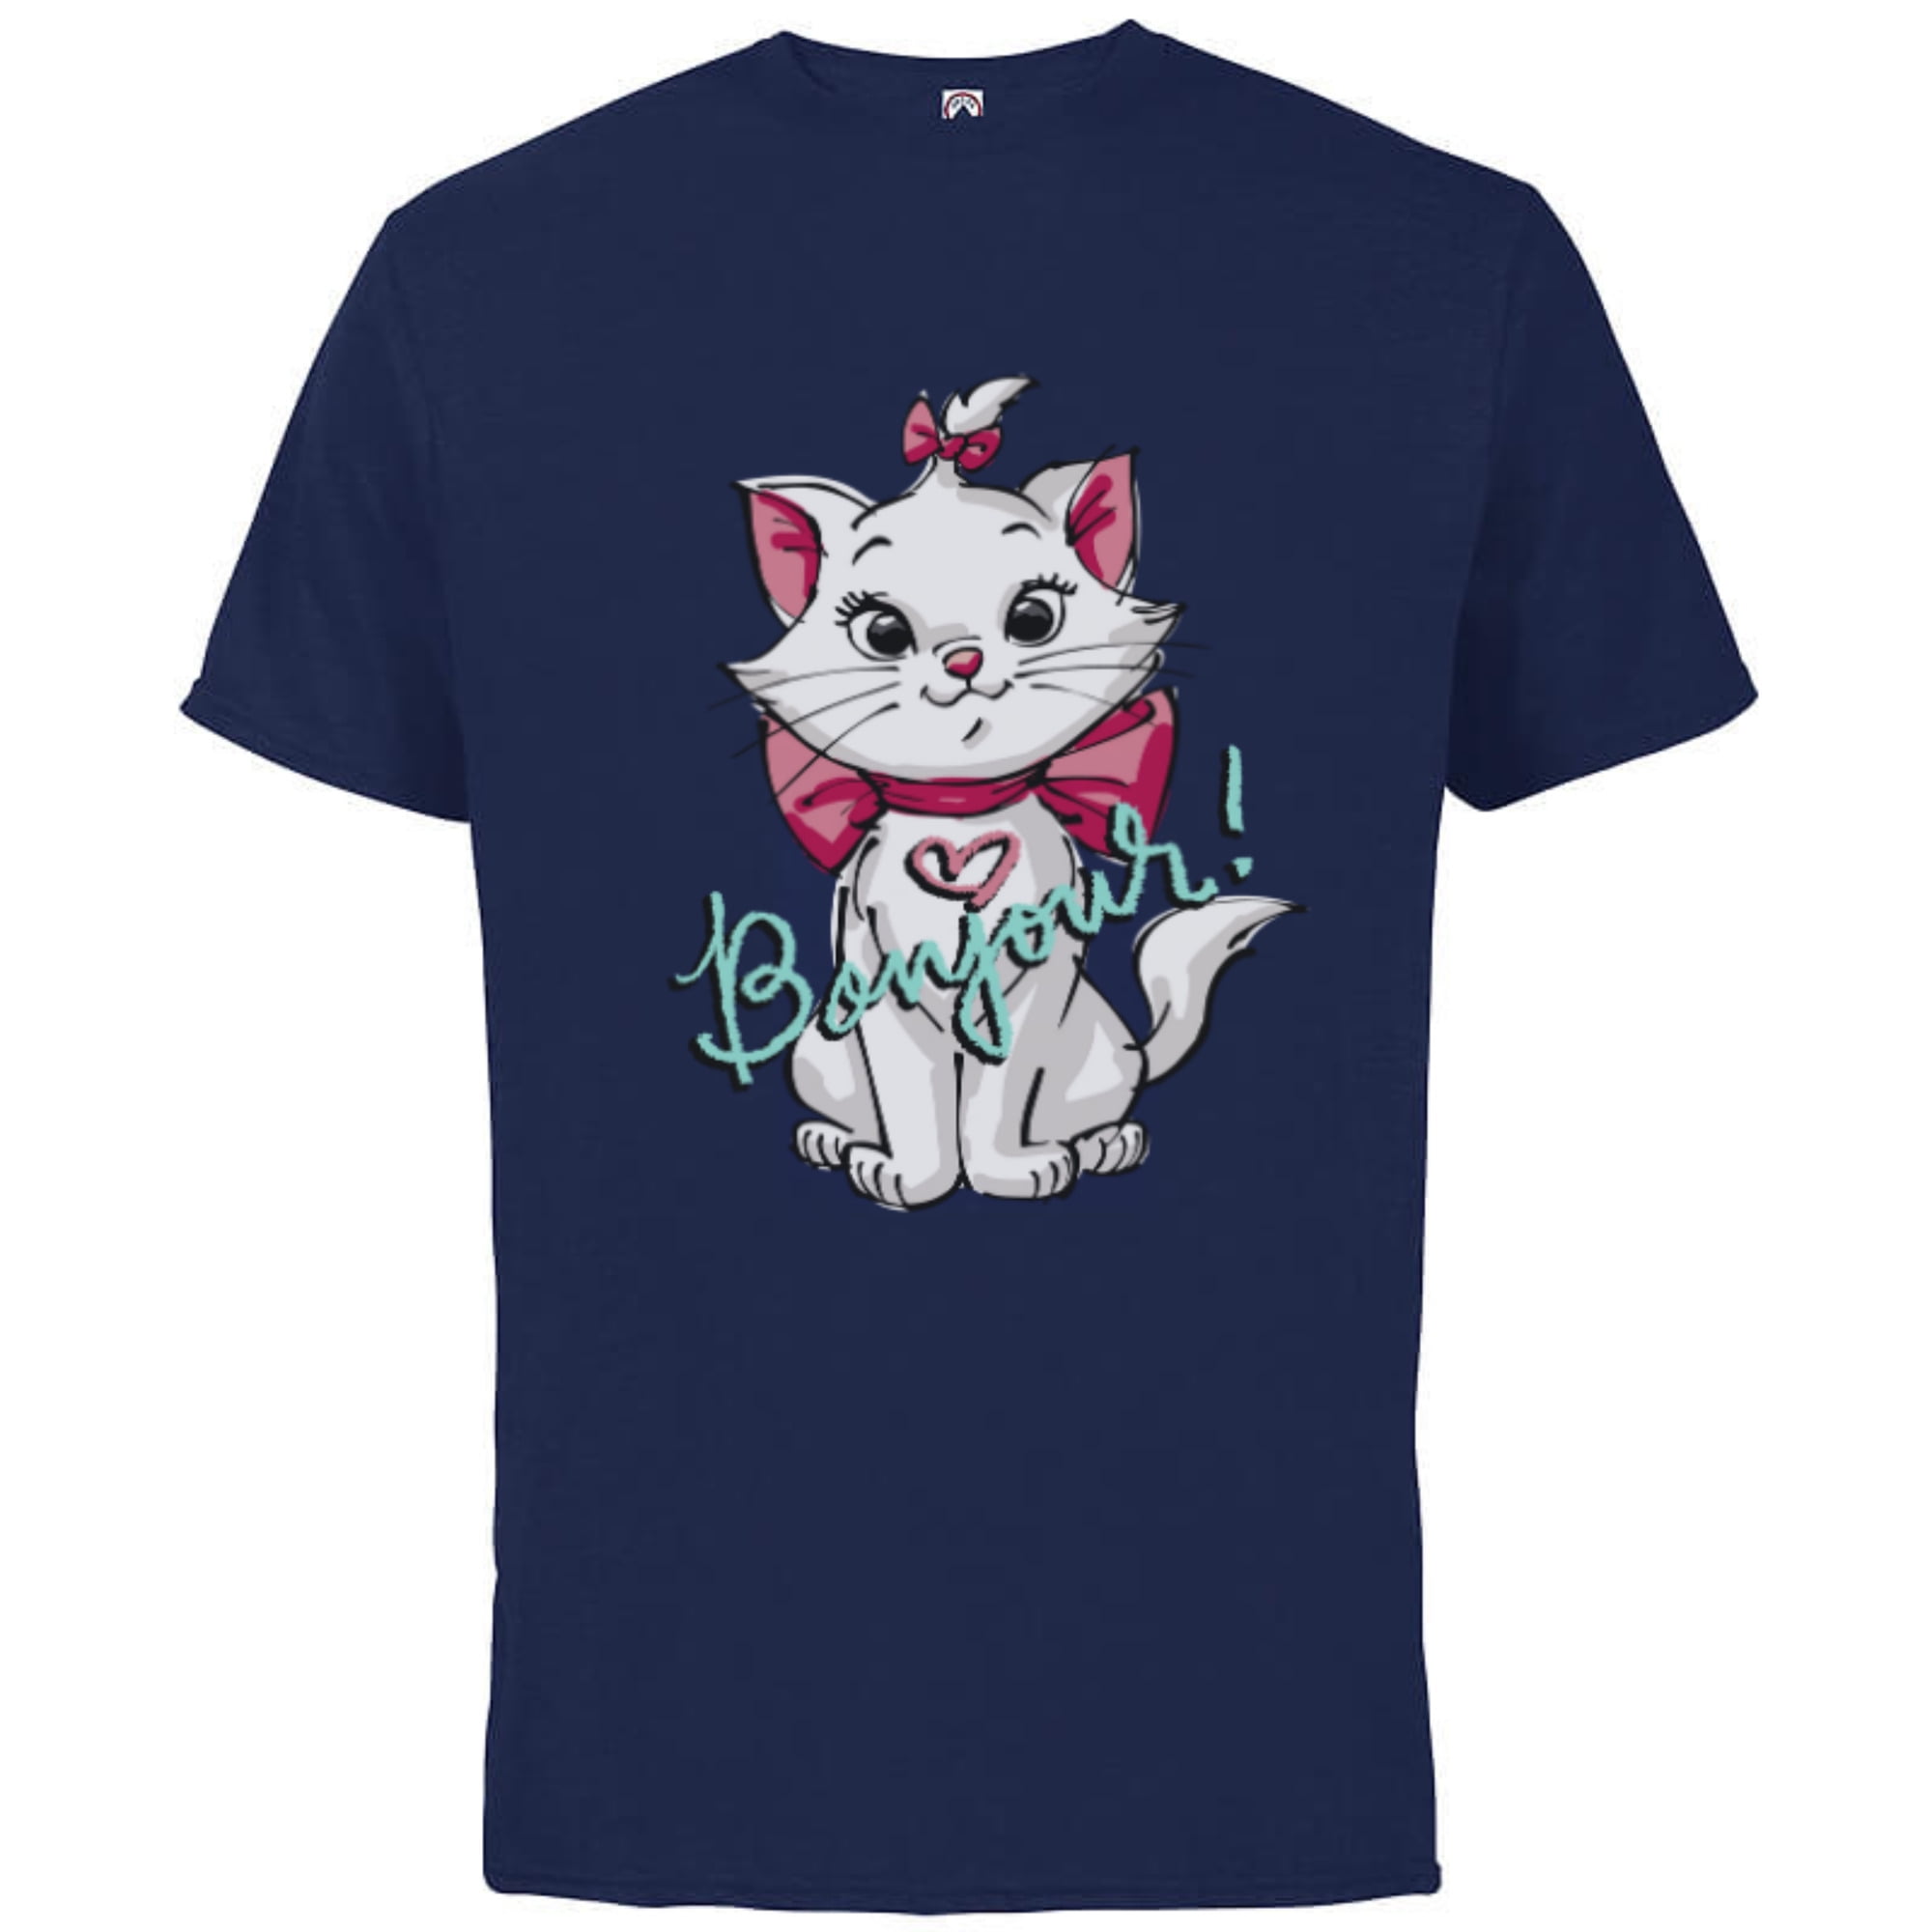 for -Customized-White T-Shirt Adults Aristocats Sleeve Bonjour Disney - Cotton Short Marie